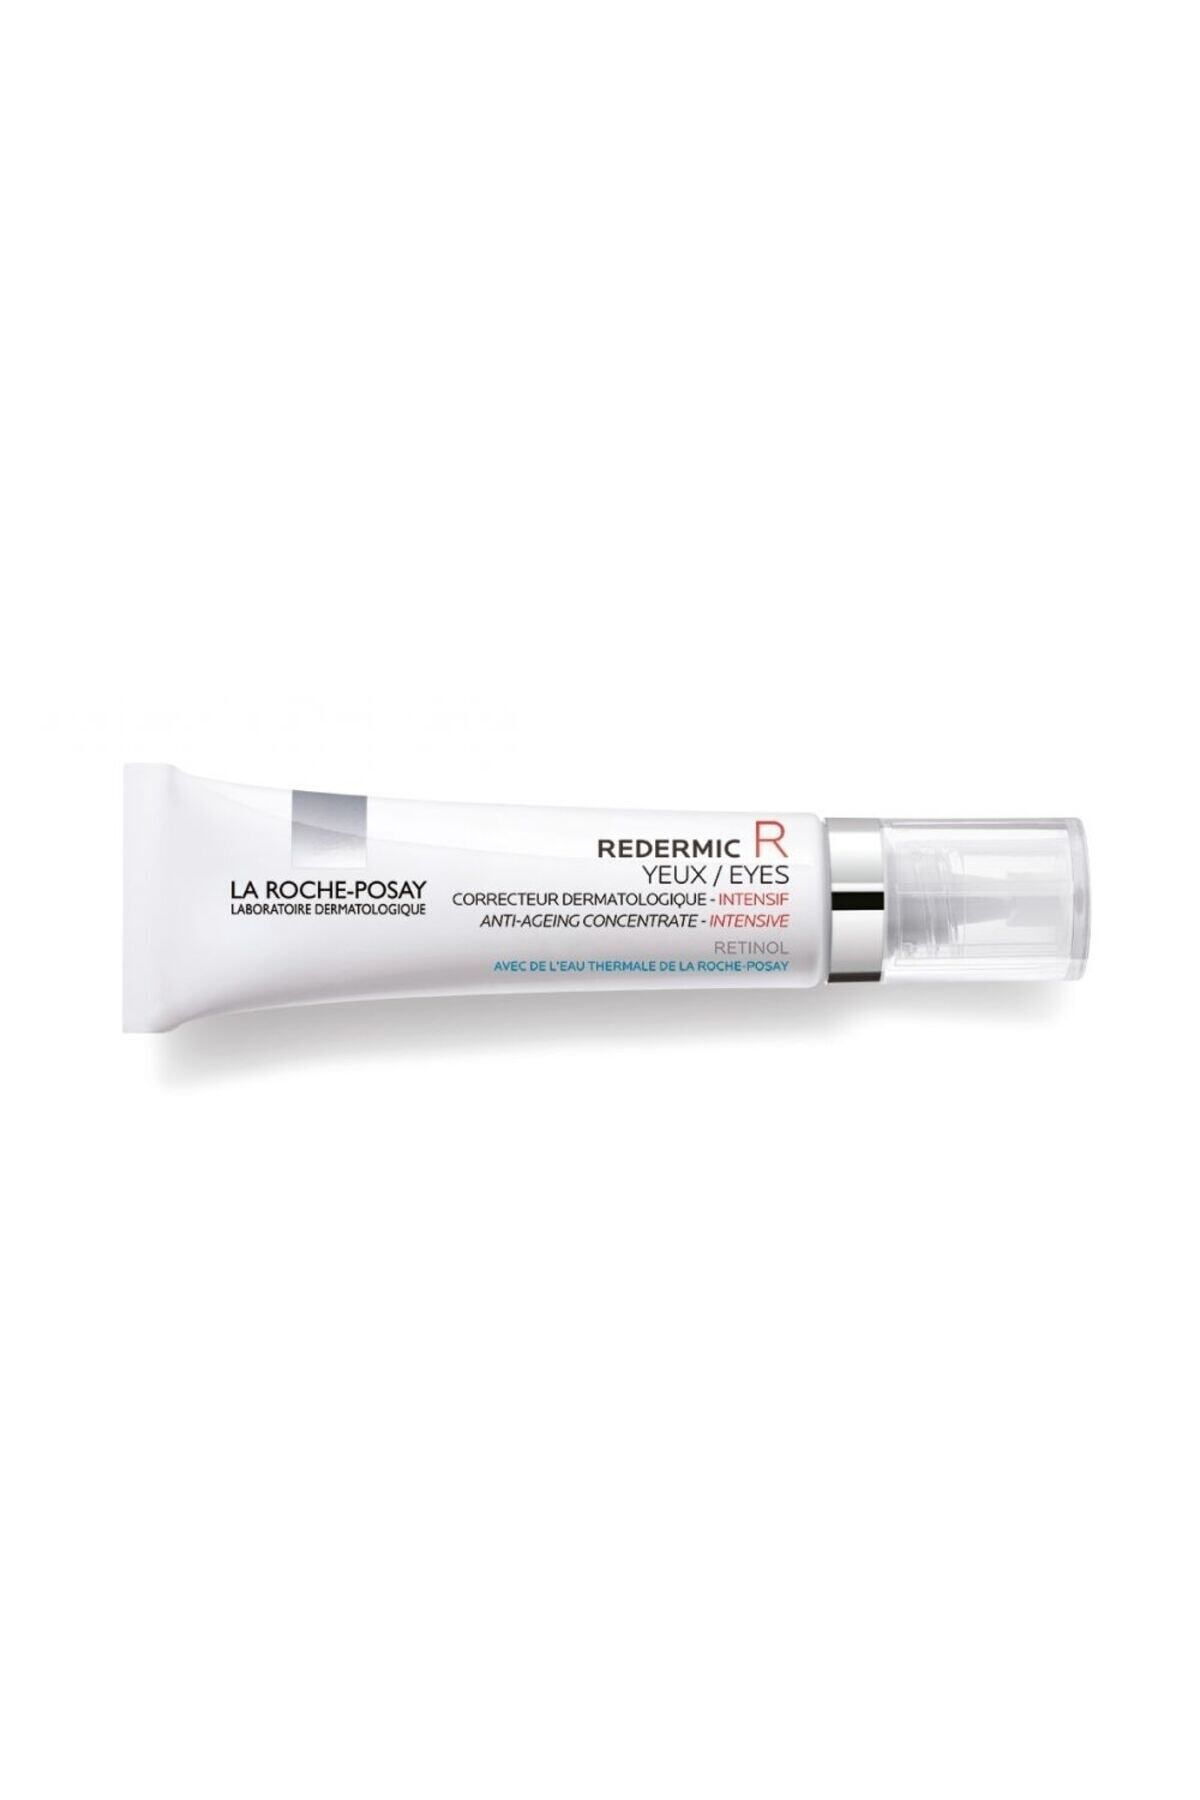 La Roche Posay Redermic R Yeux Intensive Care Cream Against Wrinkles Around the Eyes 15 ml 338